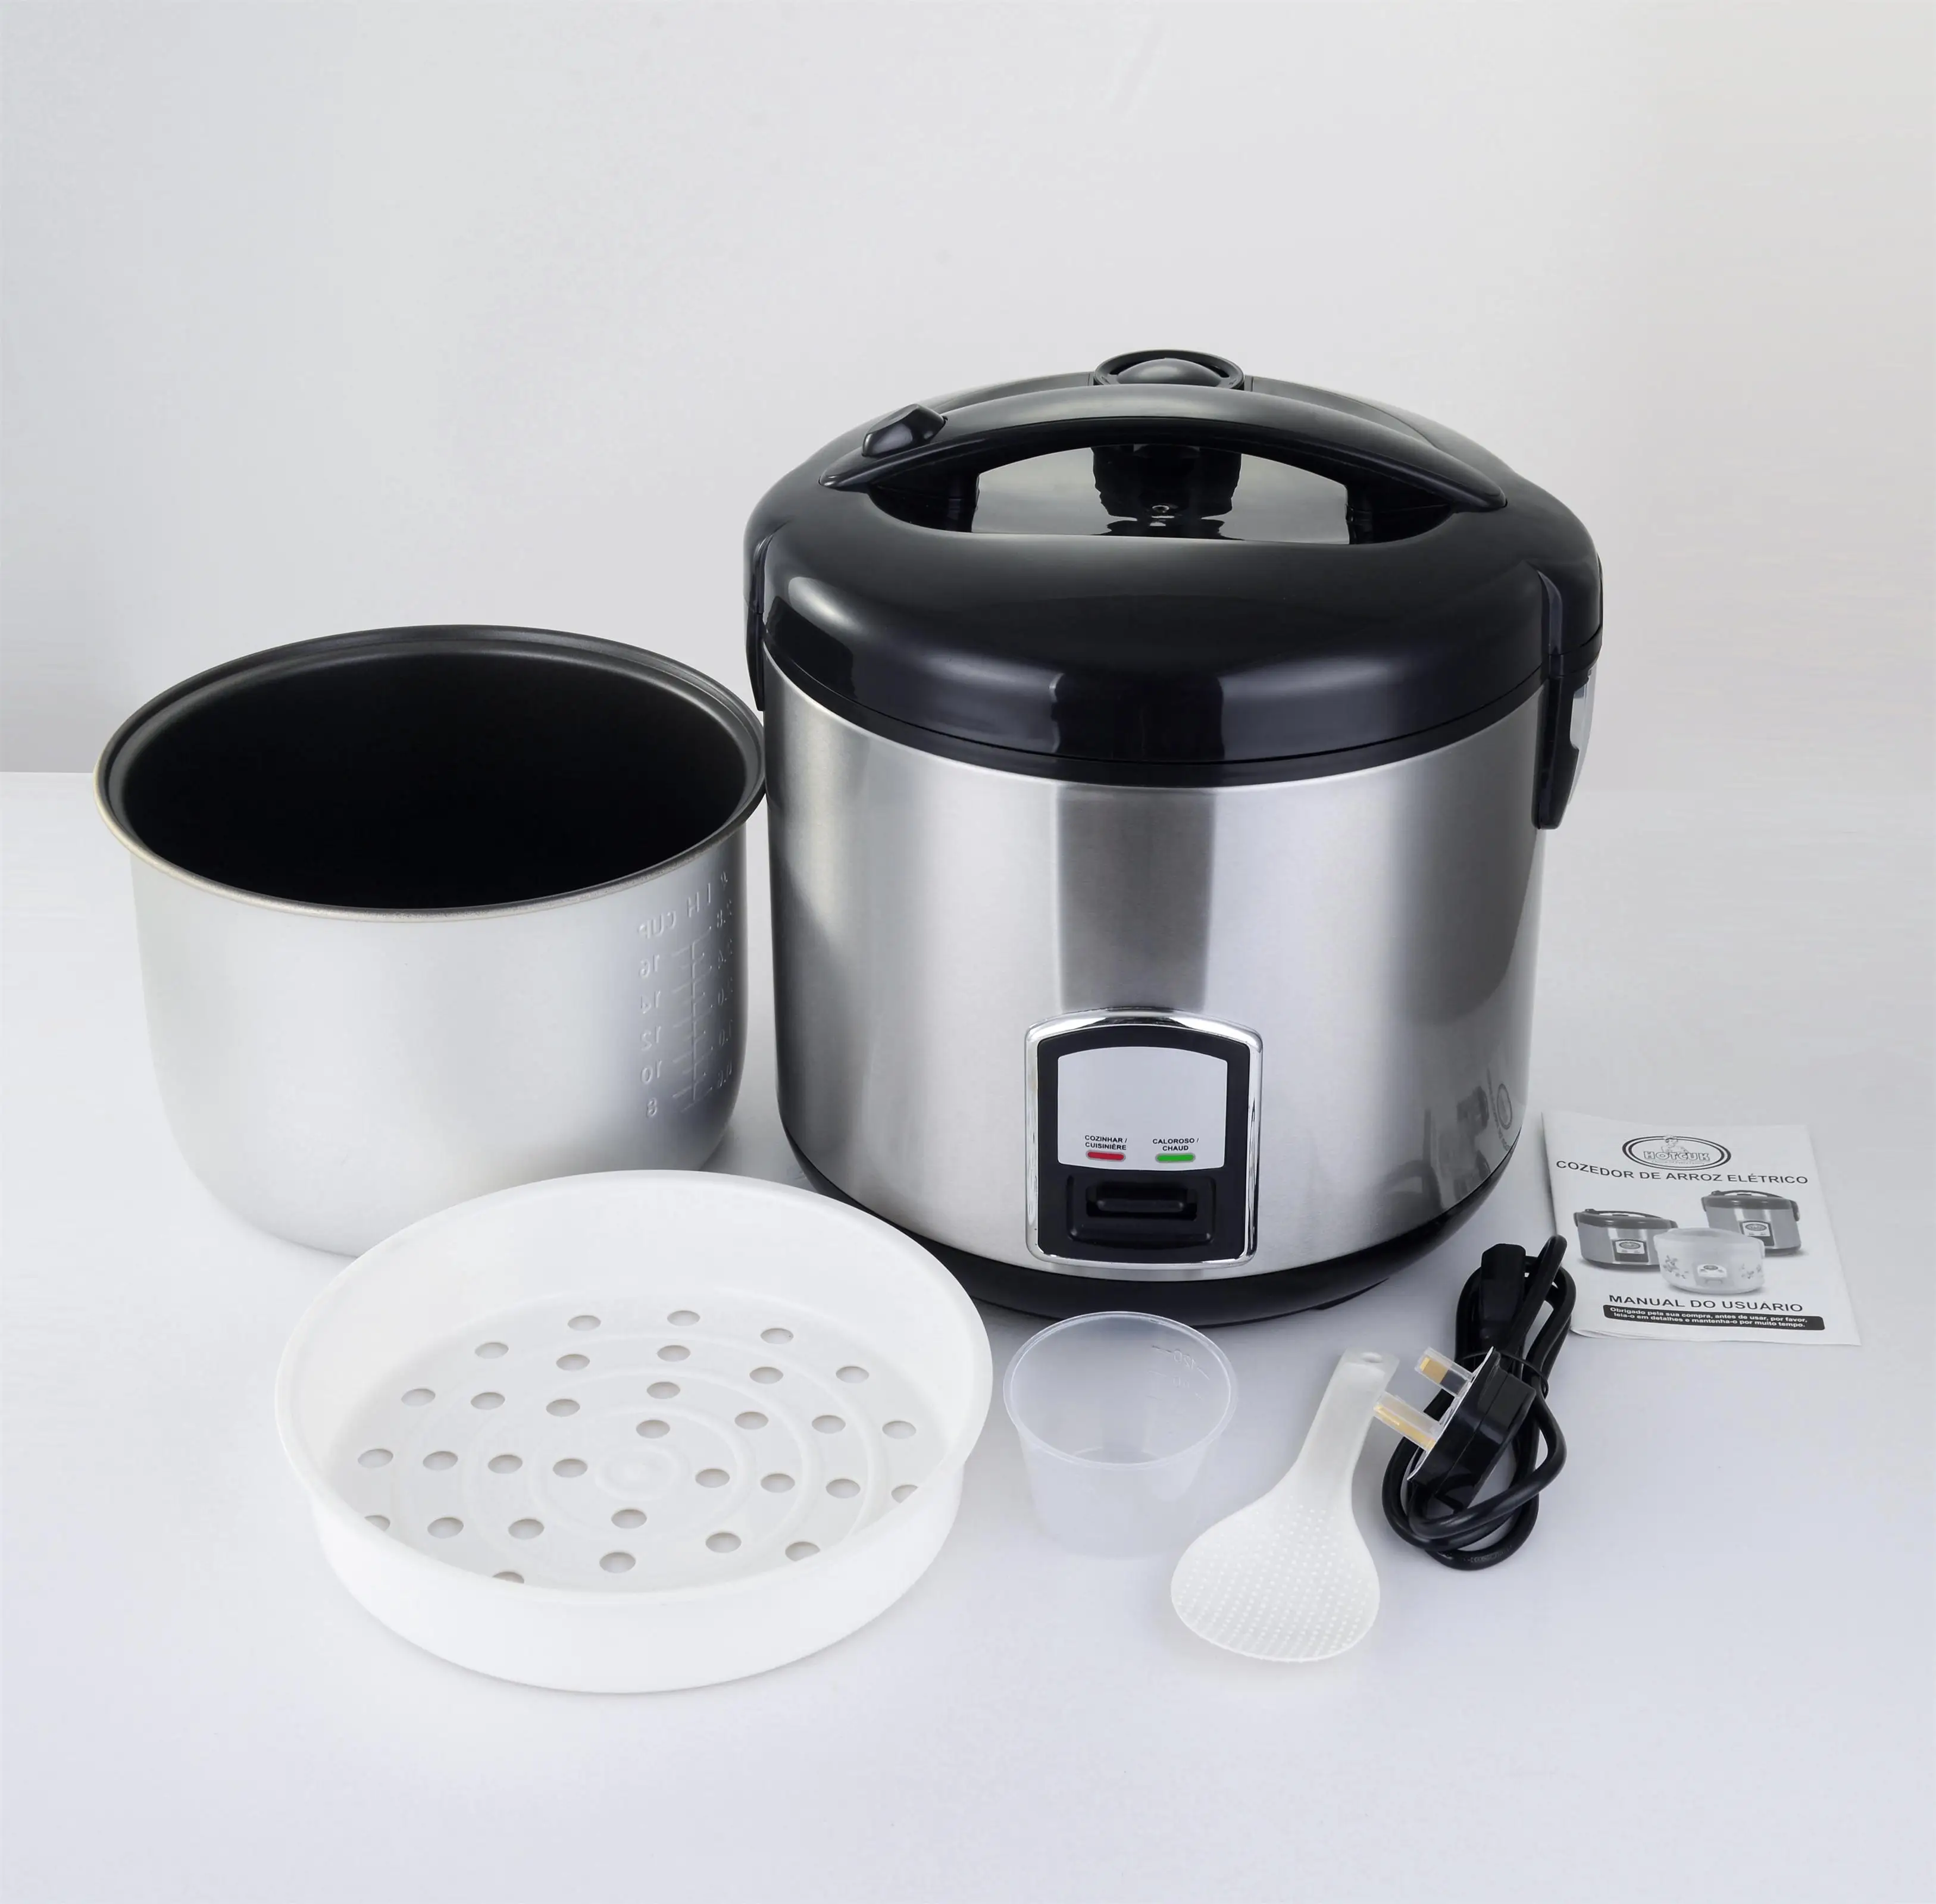 400w Stainless Steel Electric Rice Cooker - Buy Electric Rice Cooker ...